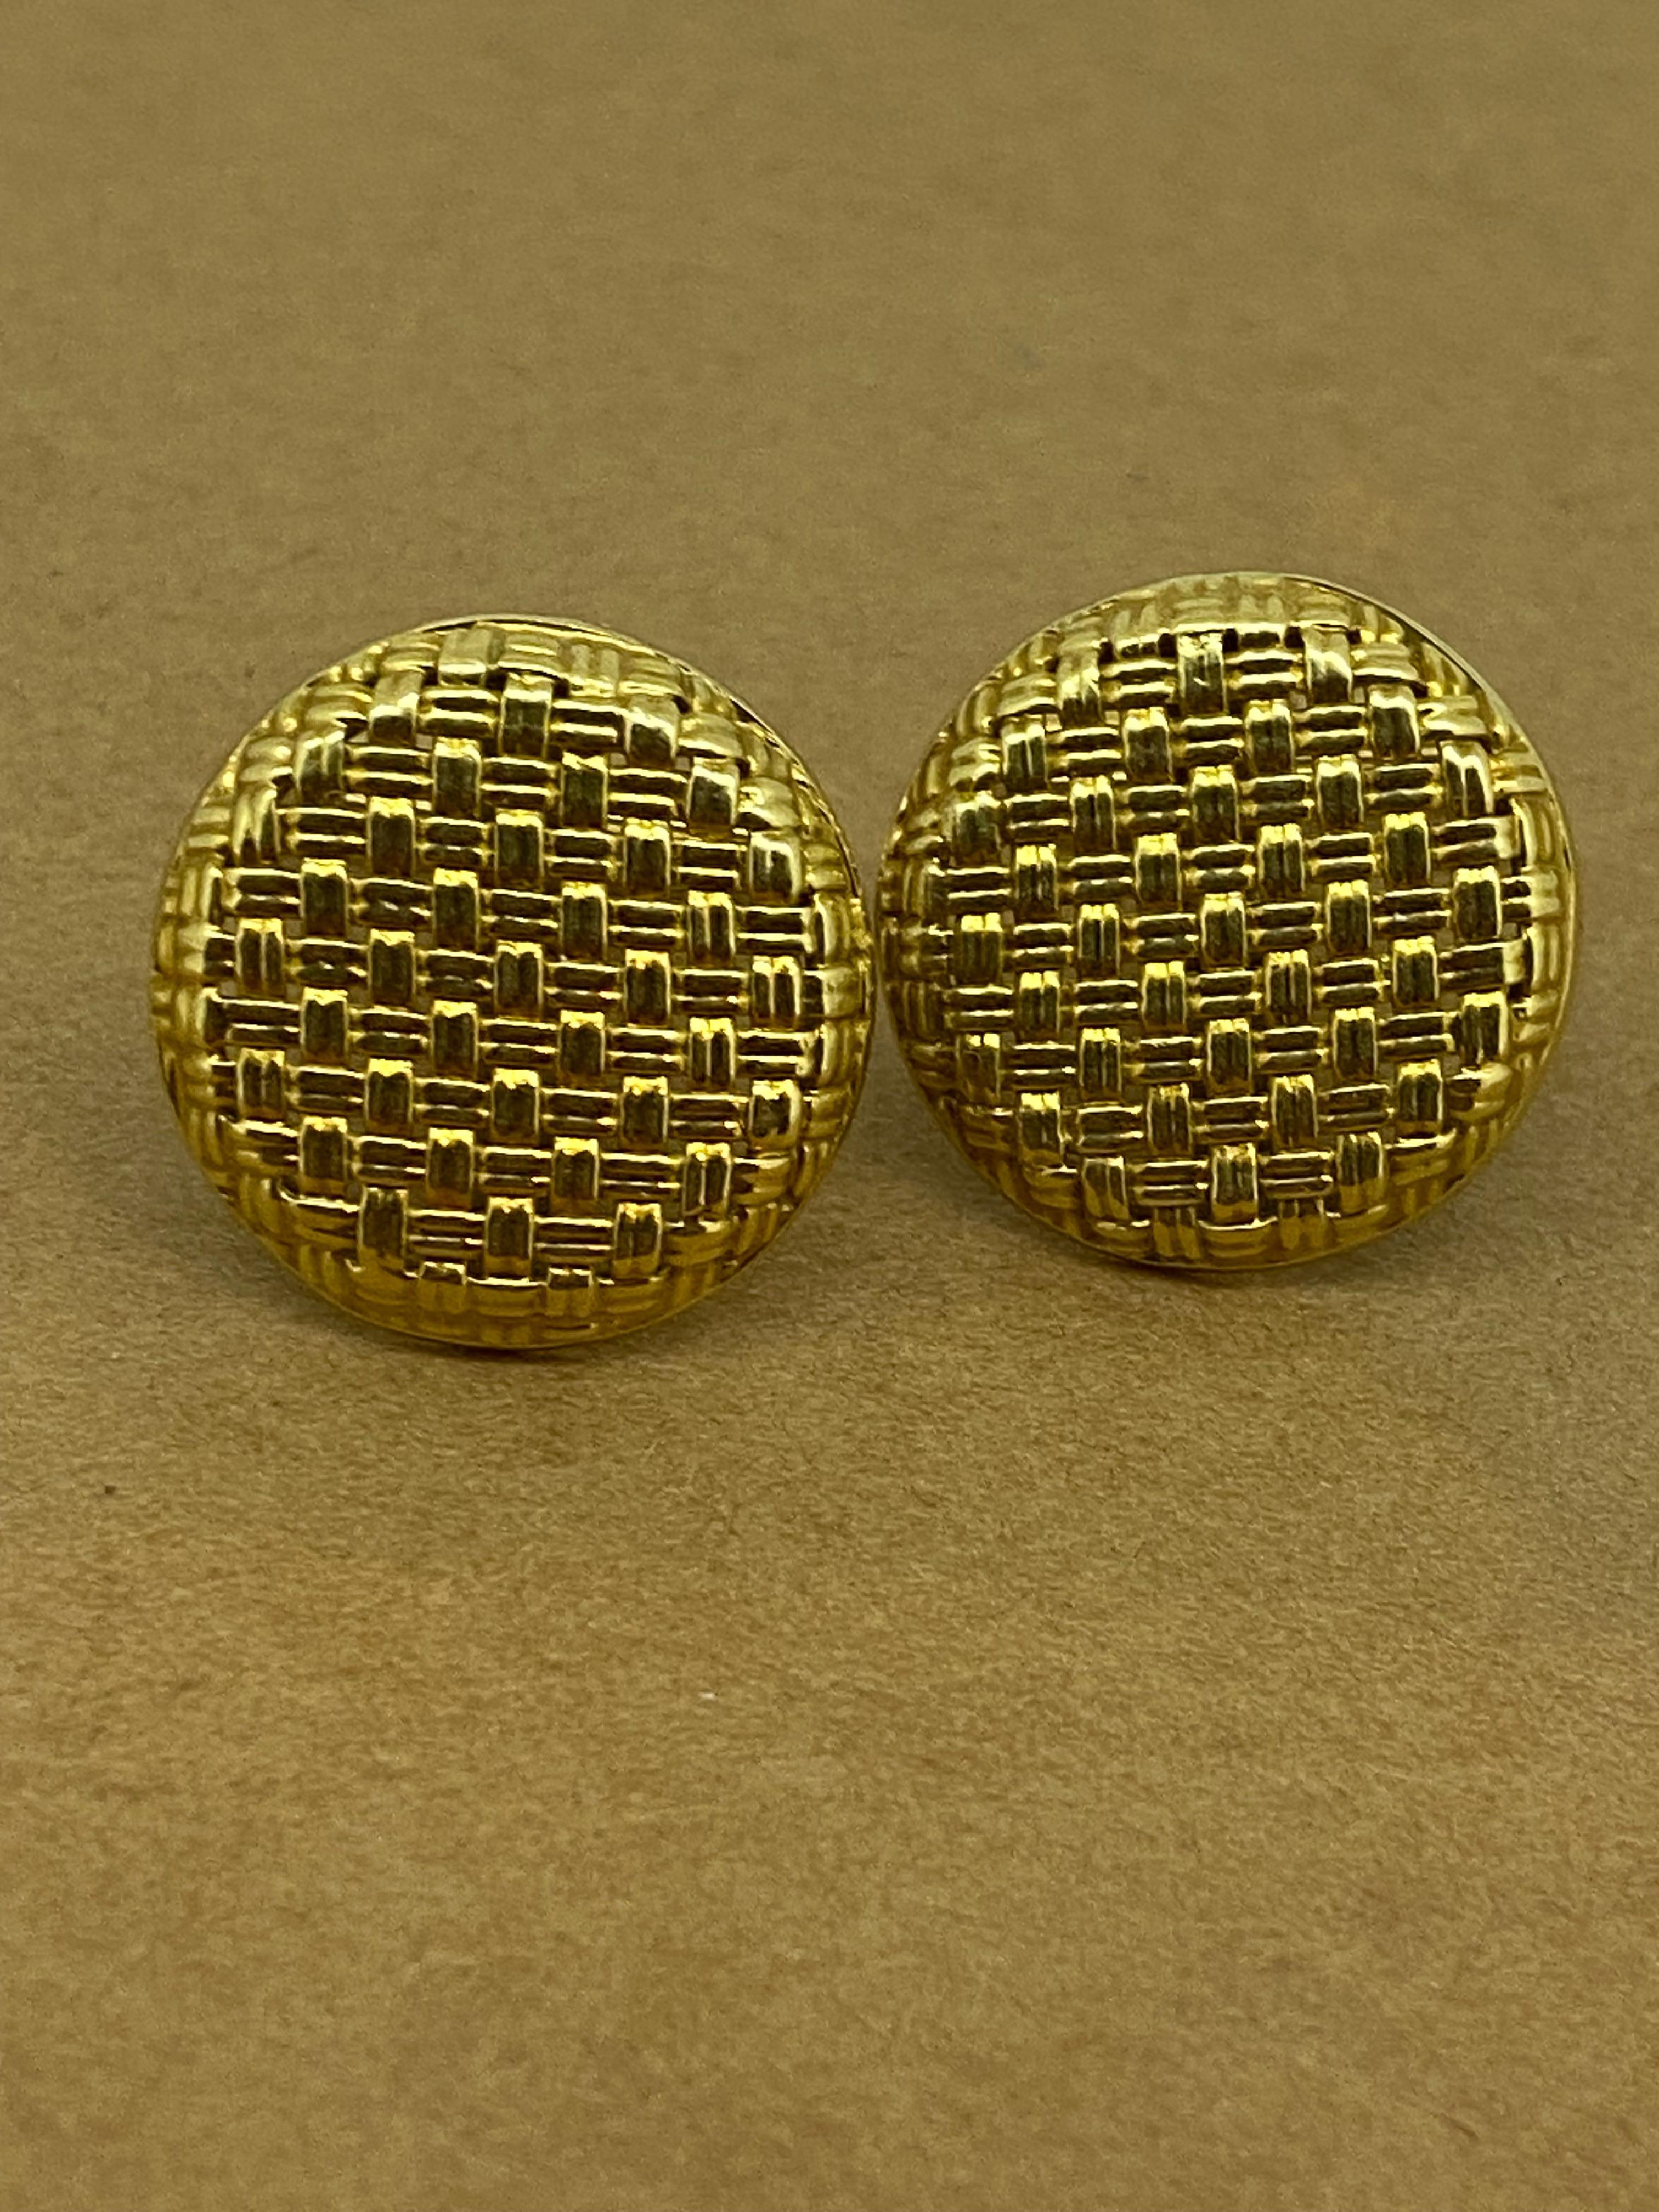 These exquisite Vintage Pair of Cufflinks

are crafted in 18K Yellow Gold, 

bearing Italian hallmarks & 750 stamp

 

Bearing gorgeous woven motif / basket effect to the front, 

that requires high level of craftmanship & 

meticulous attention to